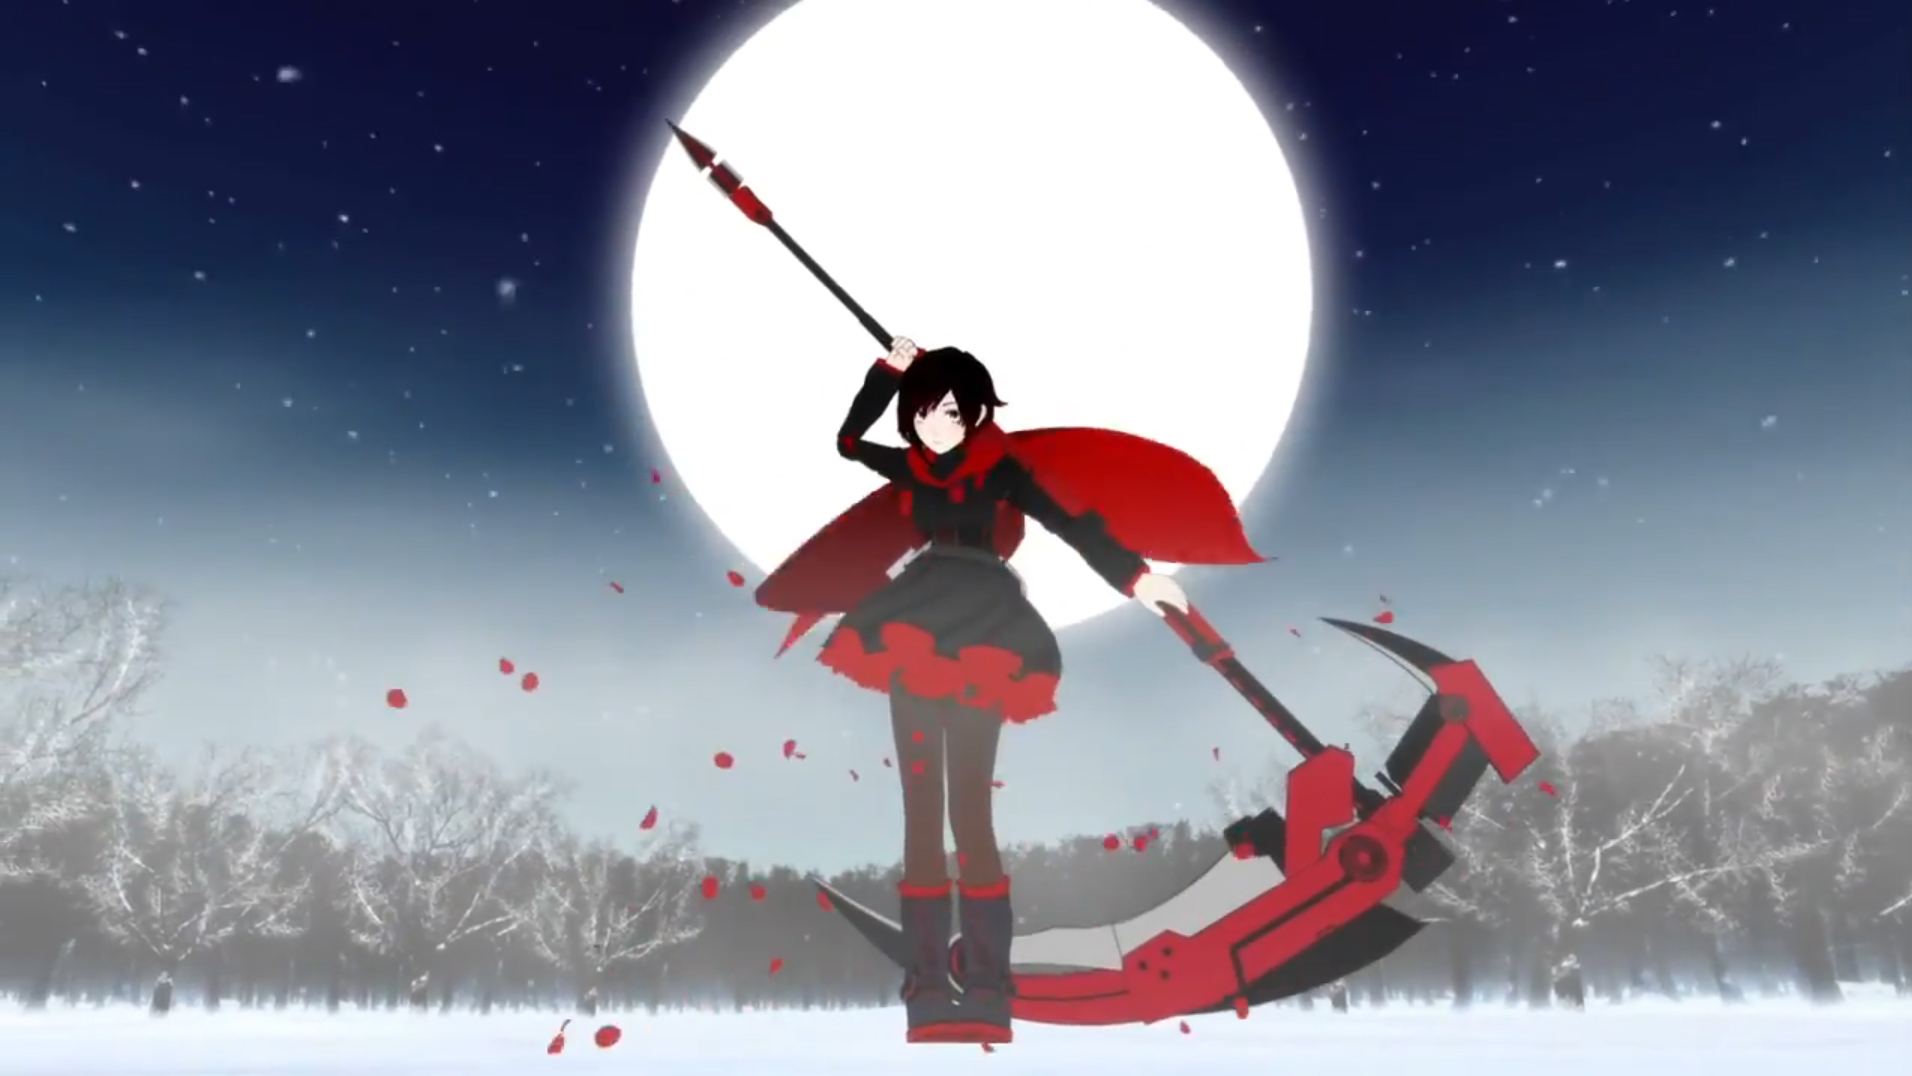 Poser Pro Used In Popular Web Media Red VS Blue and RWBY. 